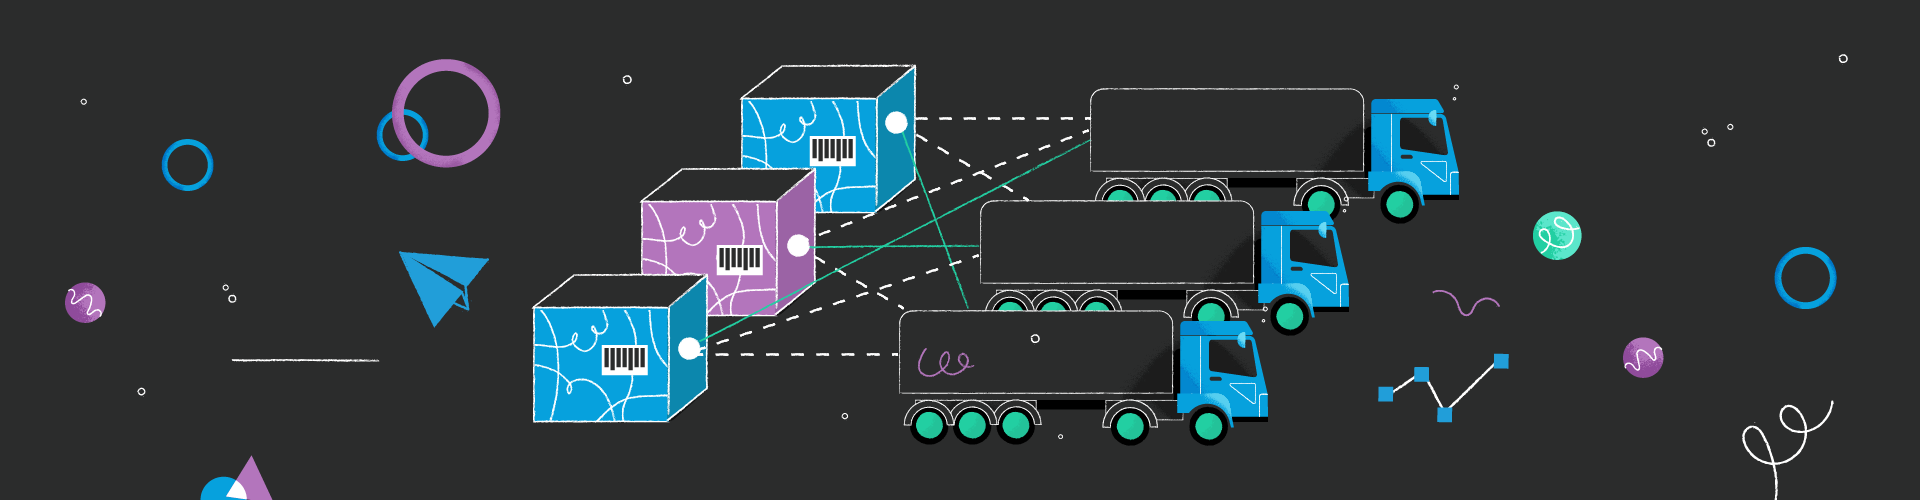 Digital Freight Matching. Building an AI-Based Tool for Personalized Load Matching Recommendations